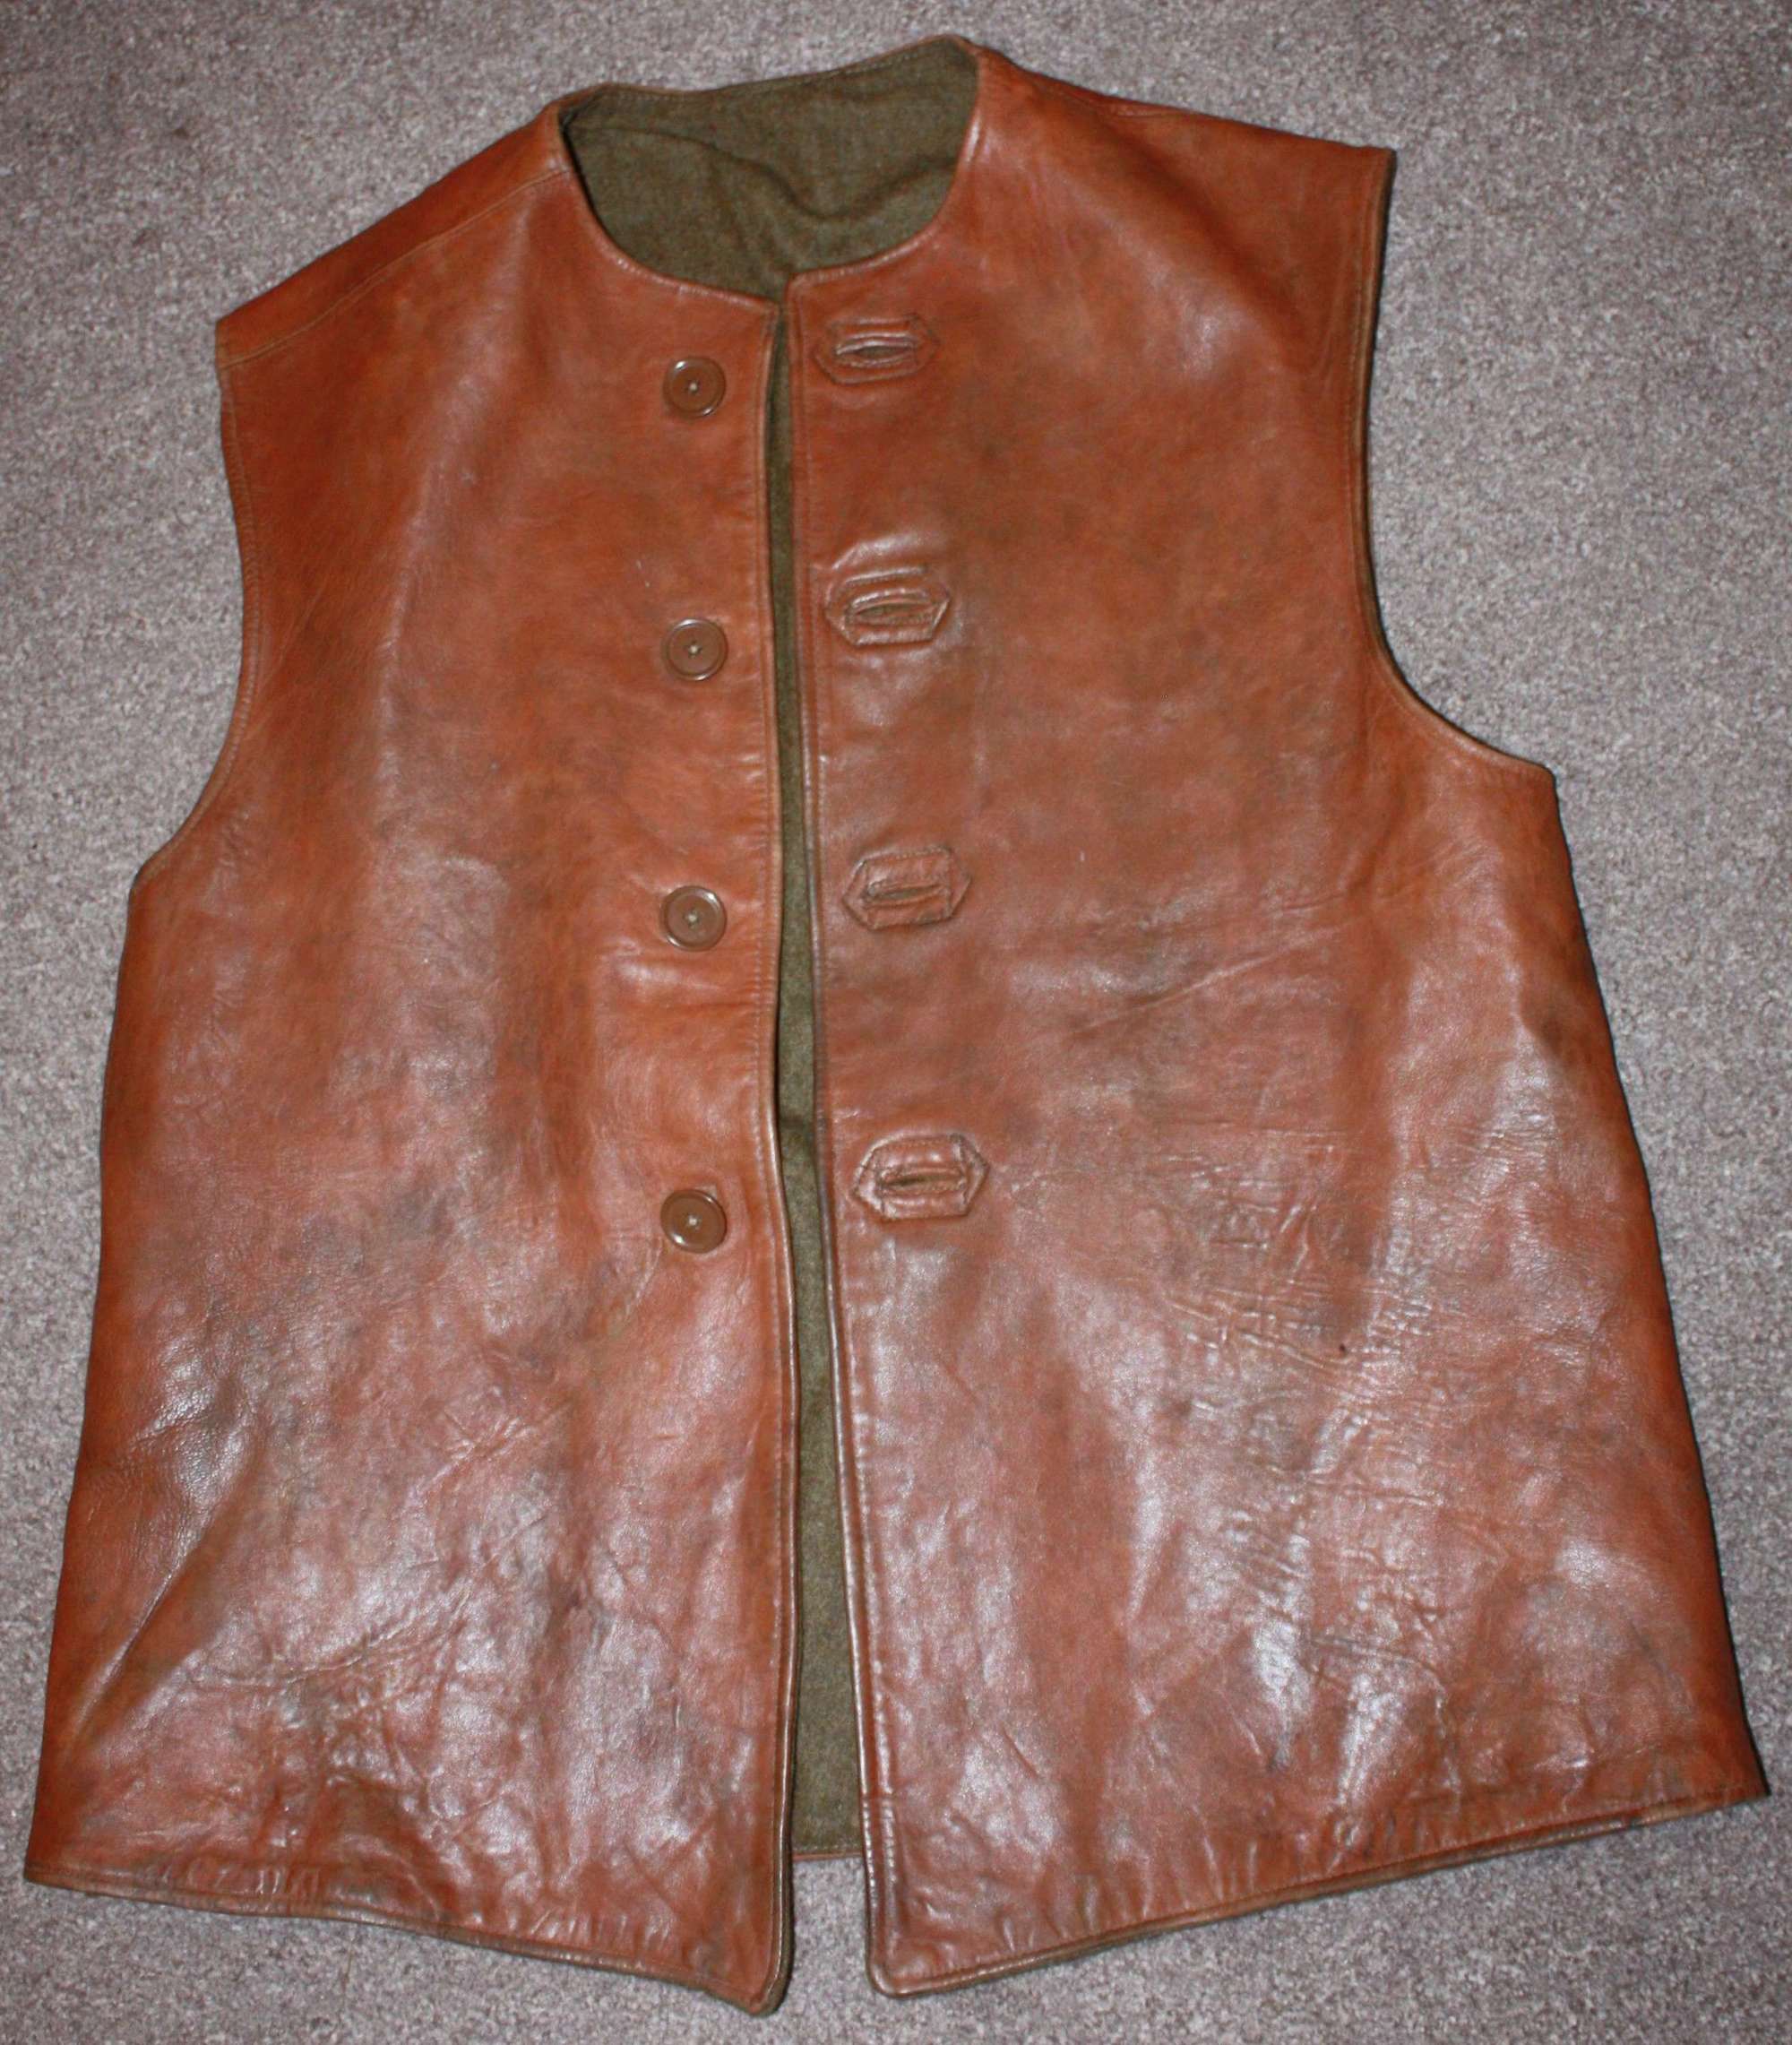 A GOOD 1945 DATED LEATHER JERKIN SIZE 2 CAMOUFLAGE  EXAMPLE